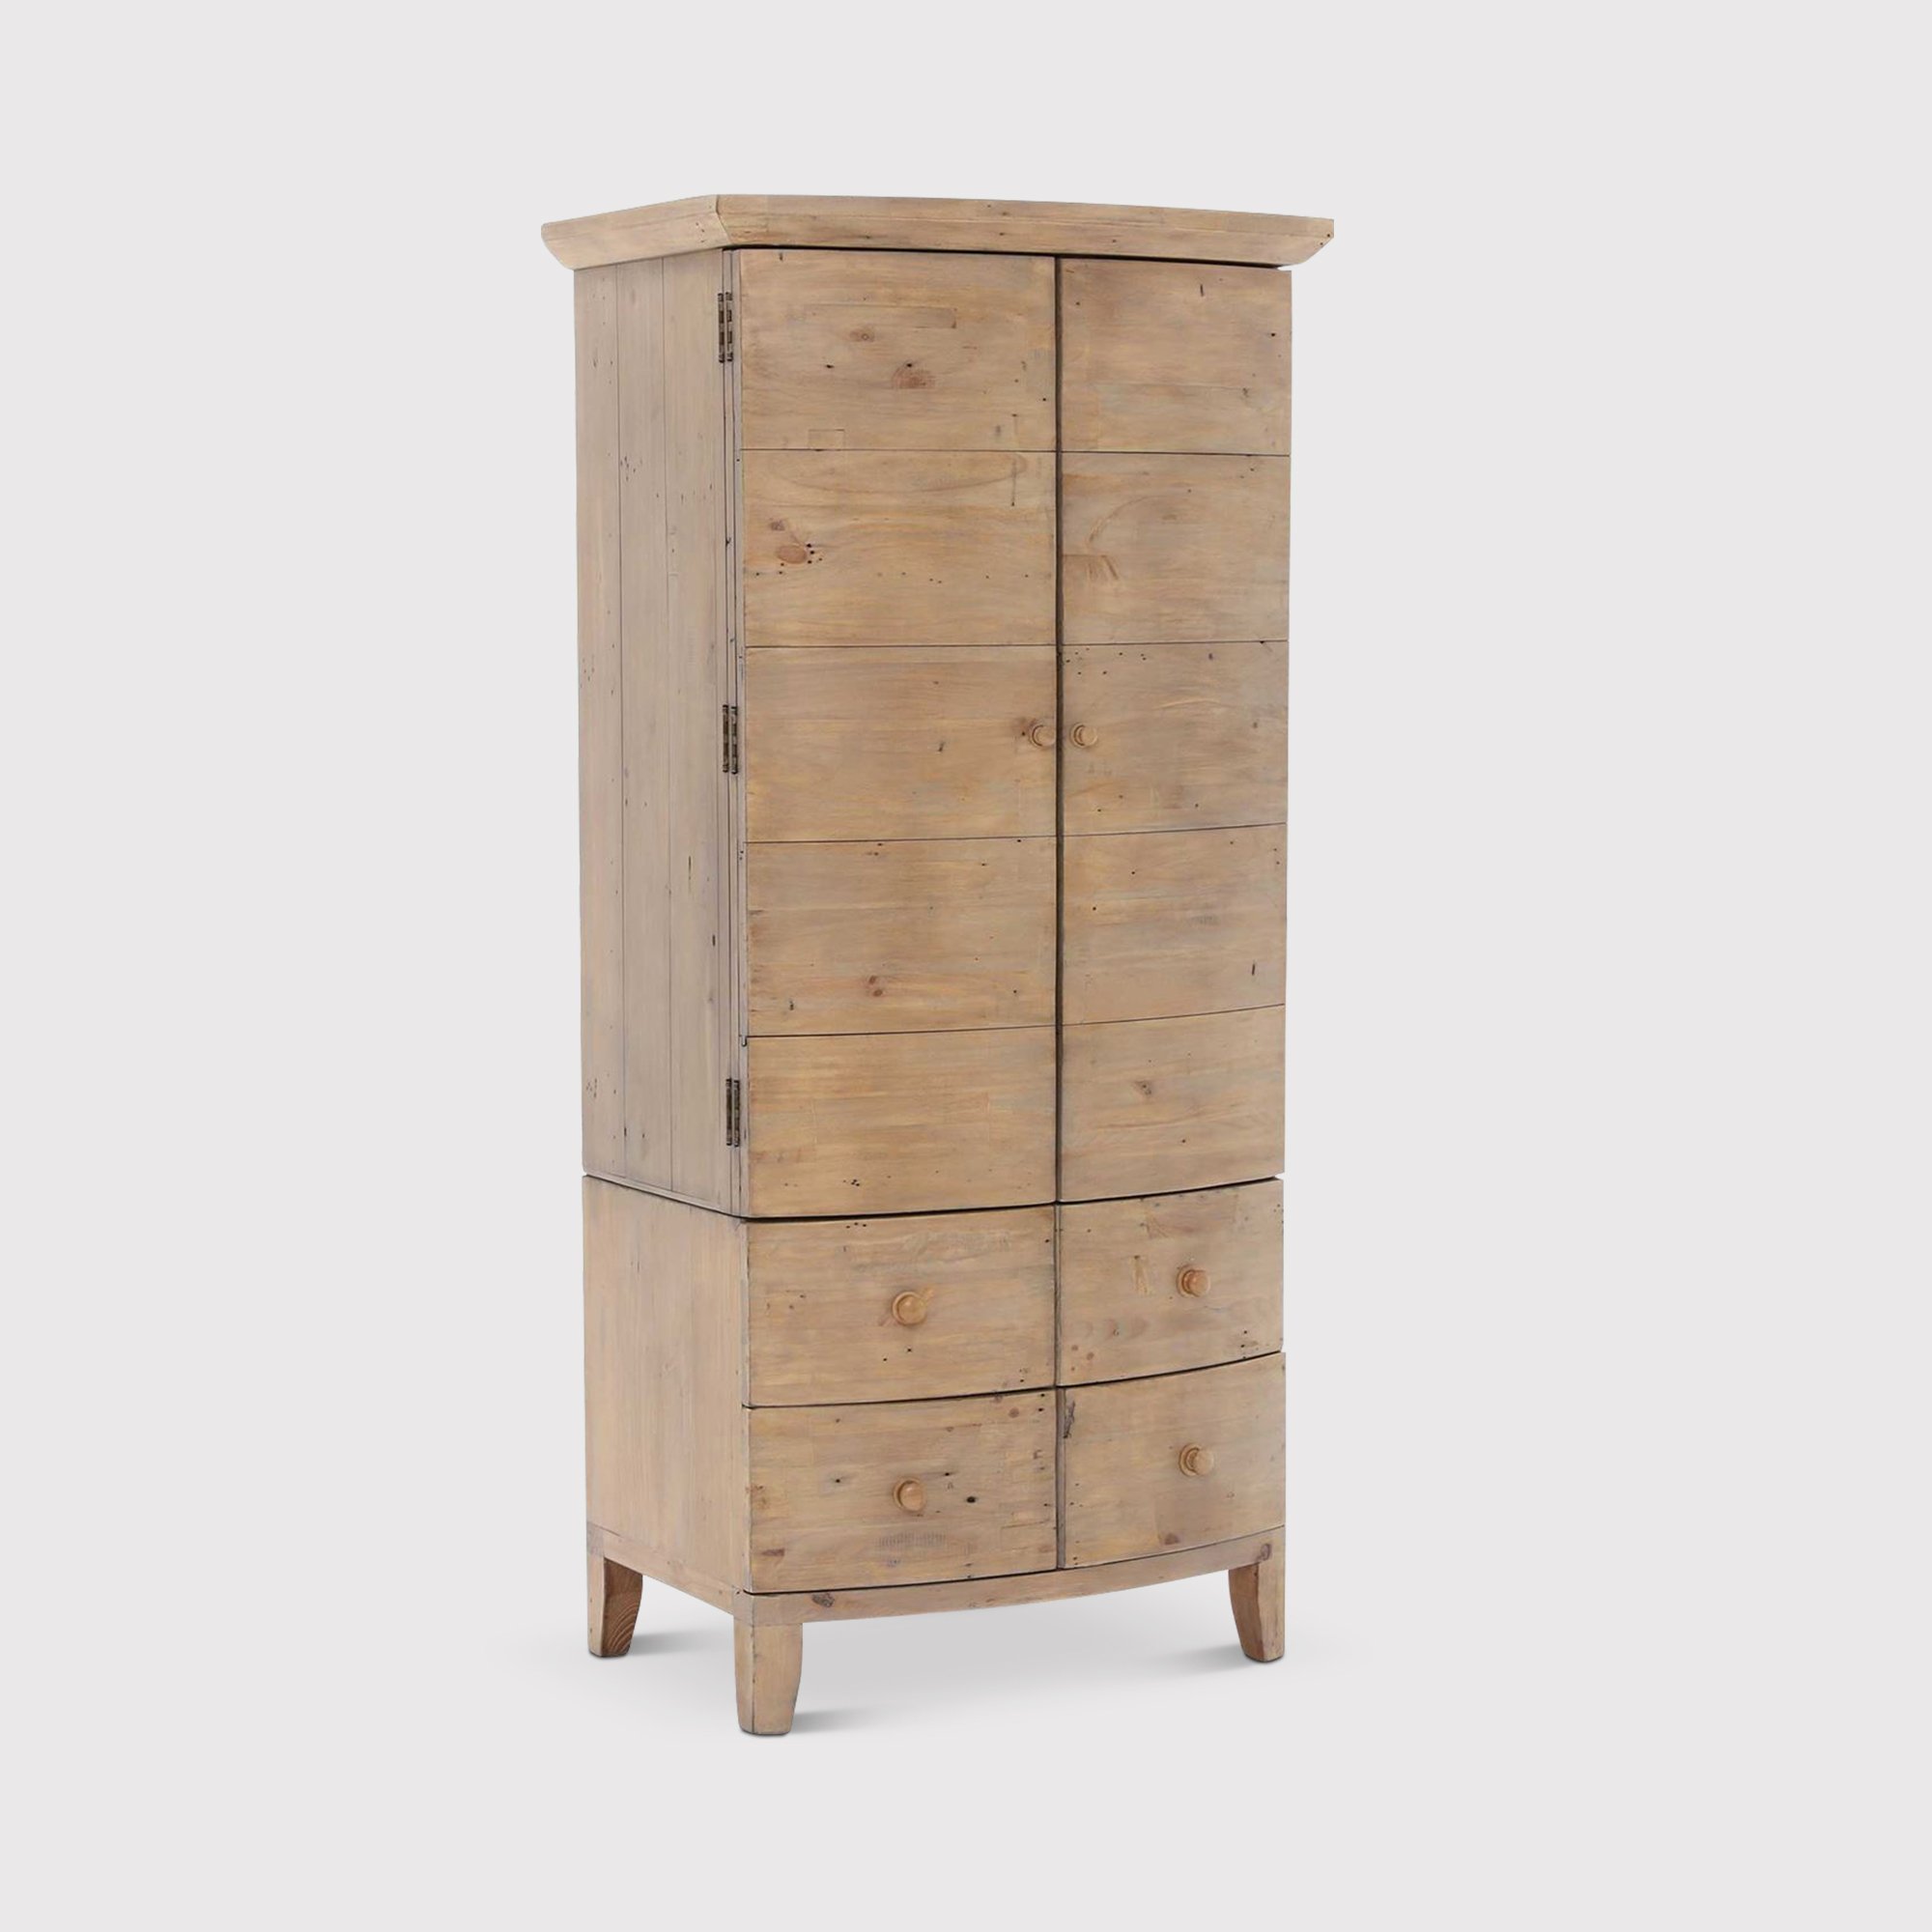 Lewes Small Wardrobe, Brown | Barker & Stonehouse